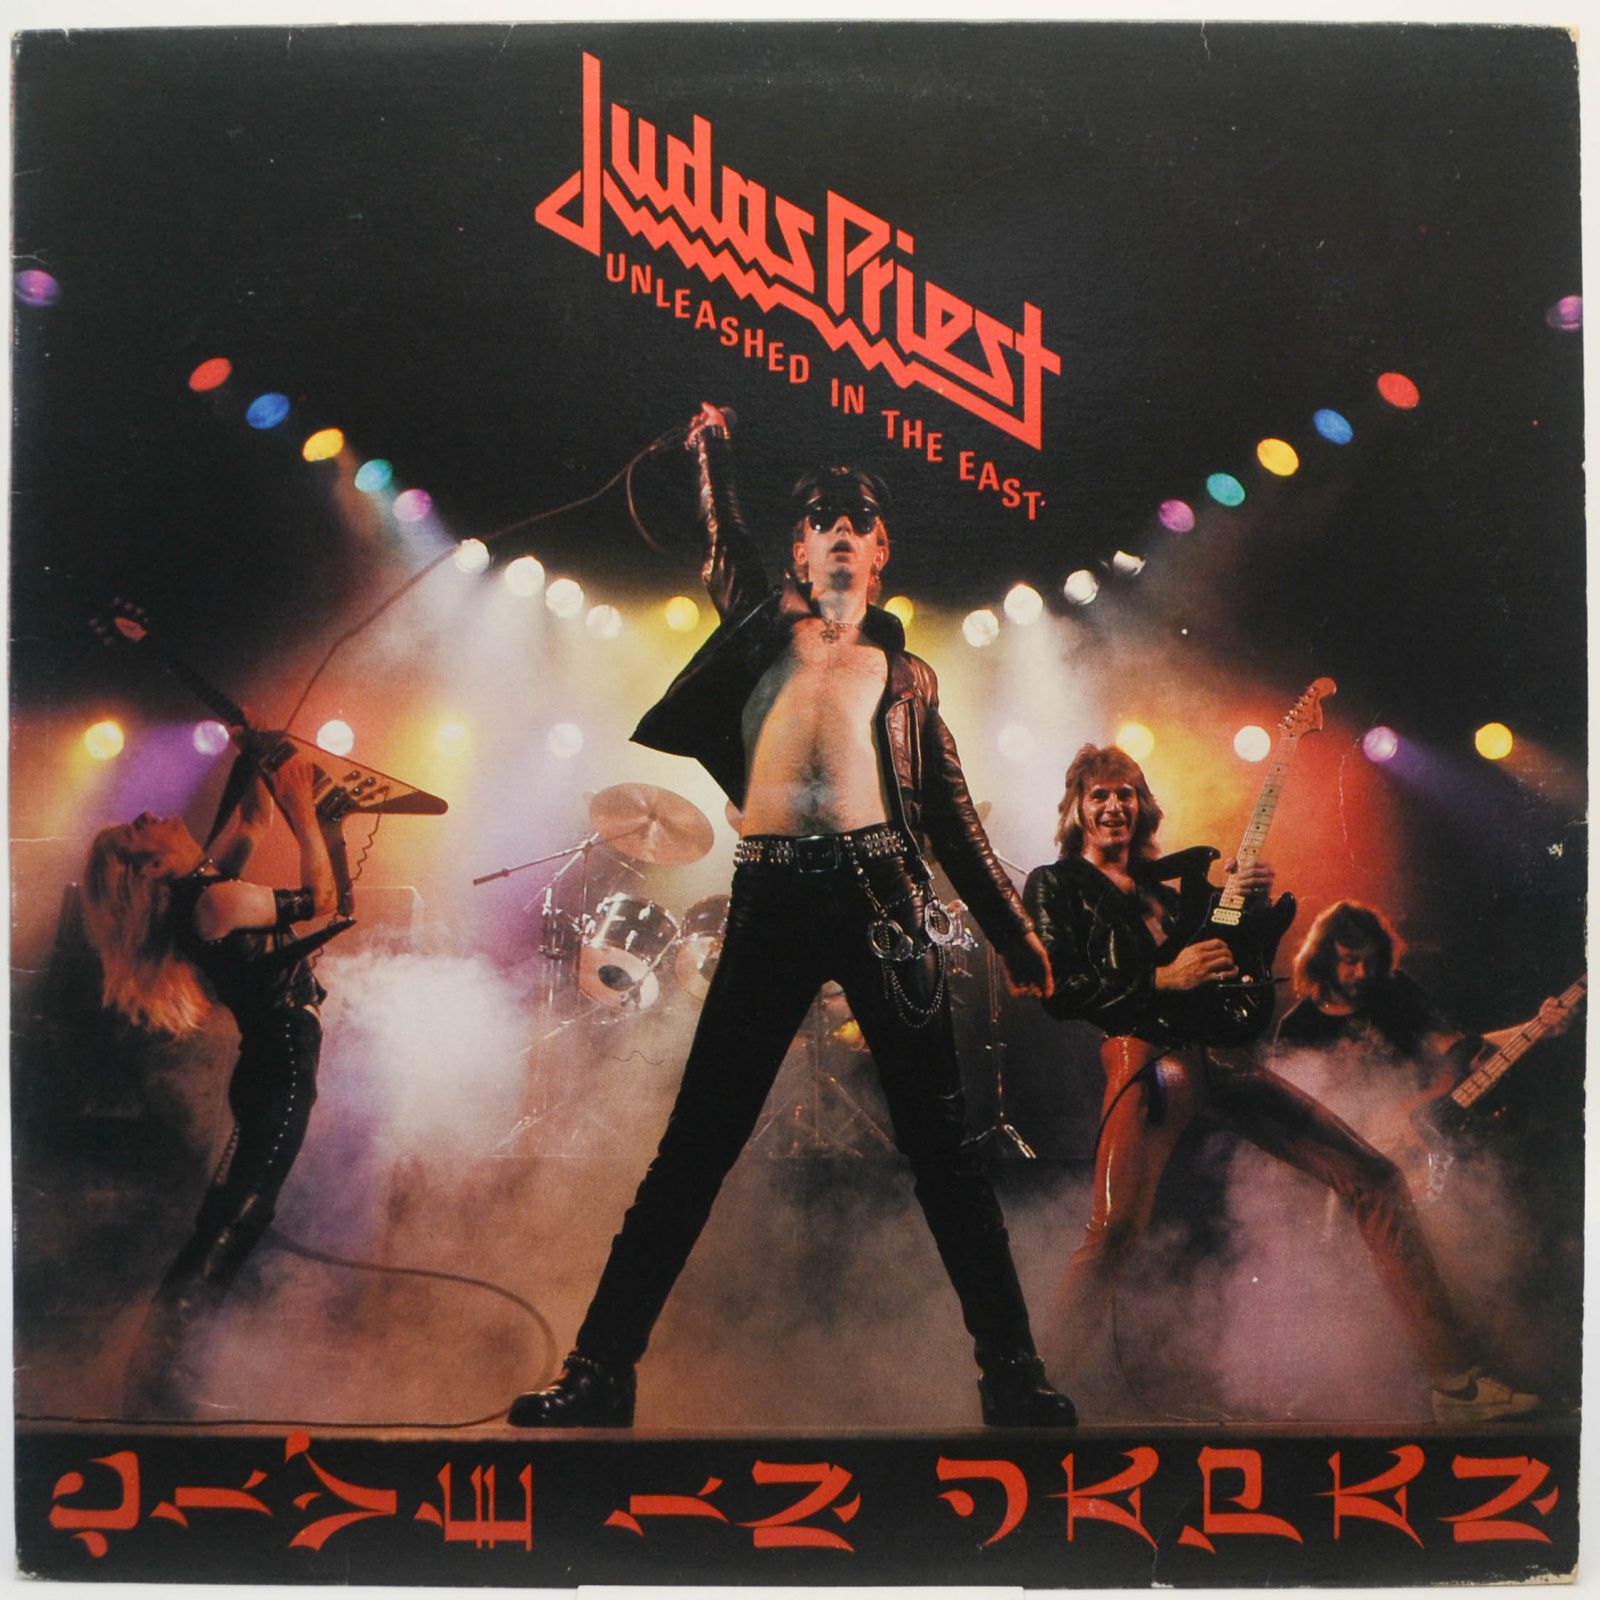 Judas Priest — Unleashed In The East (Live In Japan), 1979